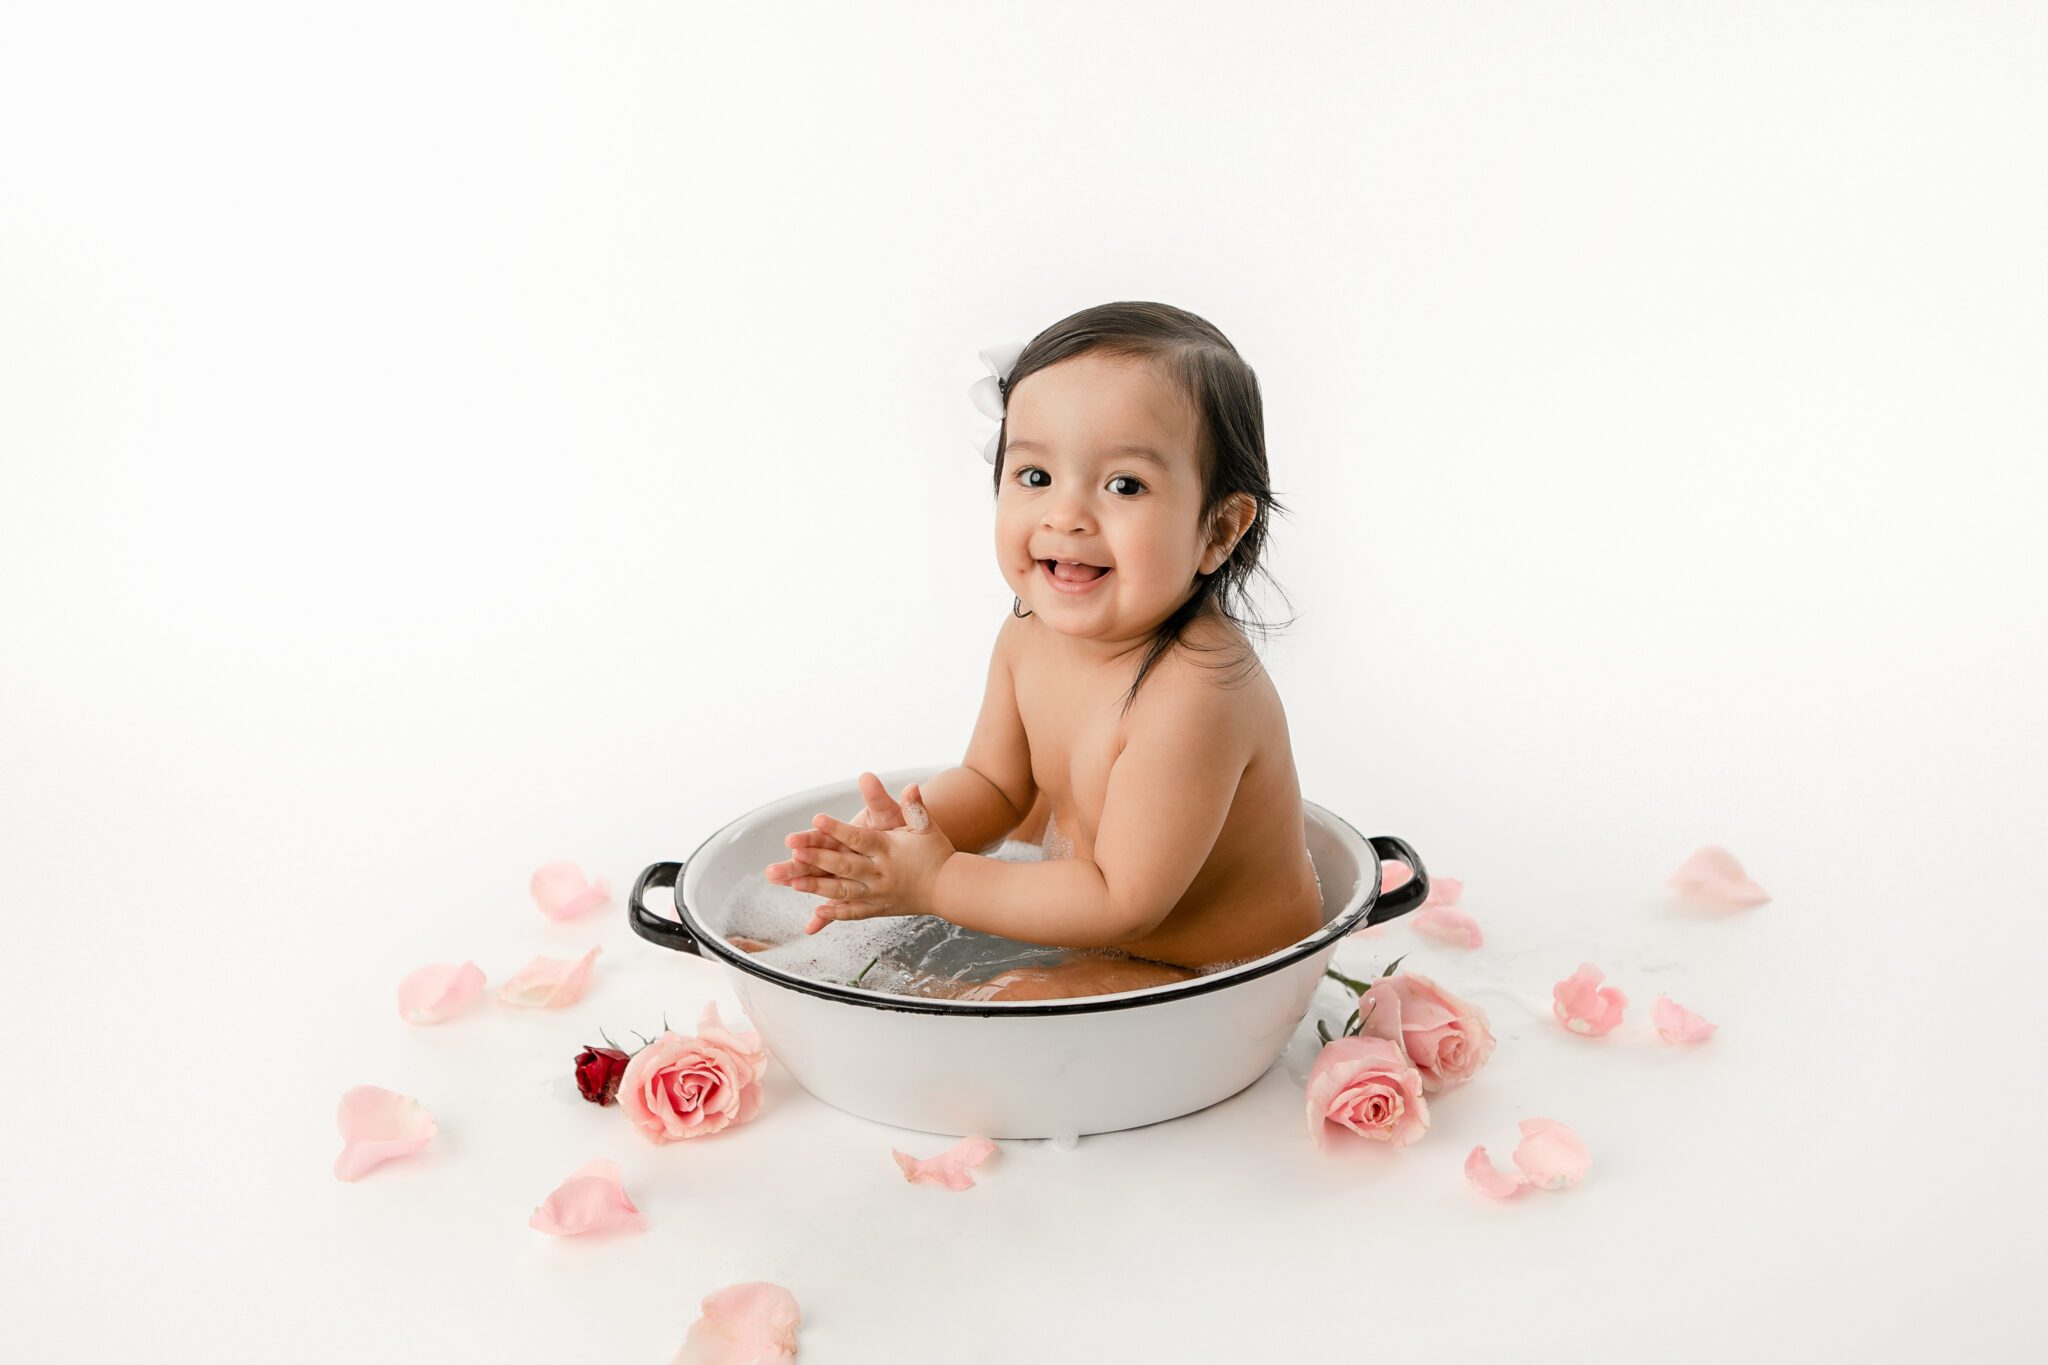 Baby in bathtub with pink flower petals with fresno baby photographer